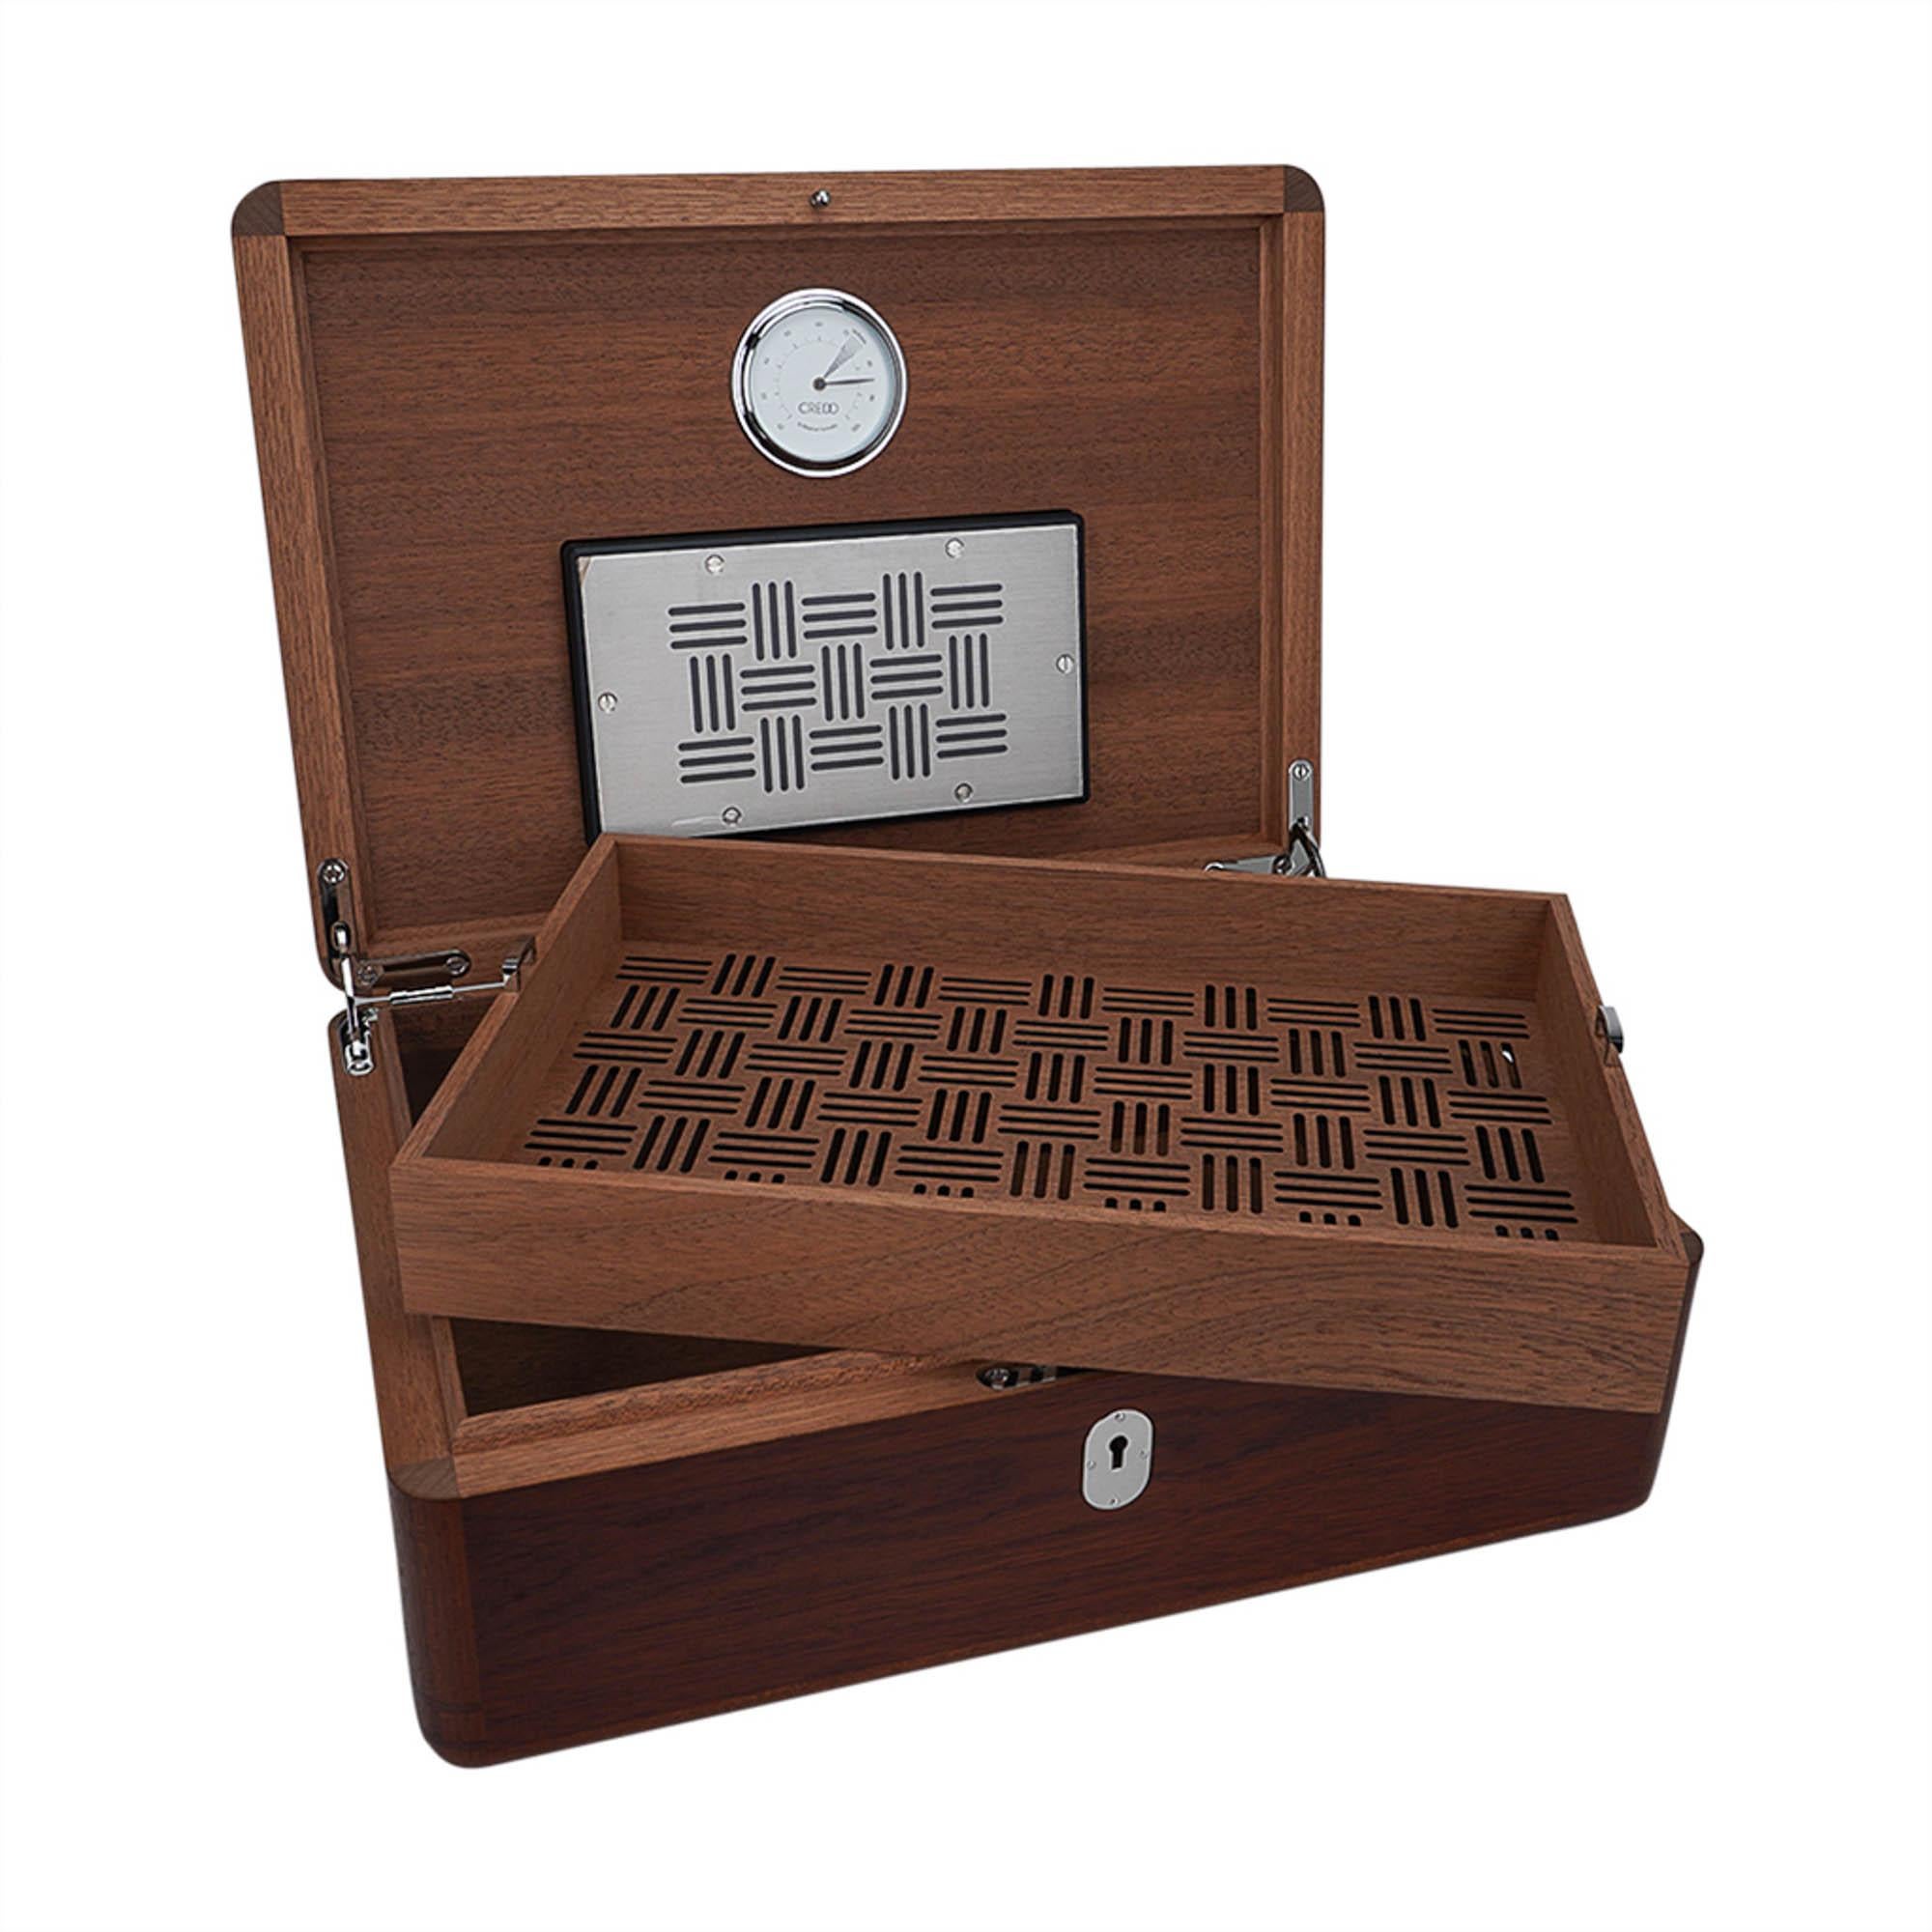 Hermes Coffret a Cigares Humidor Limited Edition Sycamore Holz Sesam Eidechse im Angebot 5